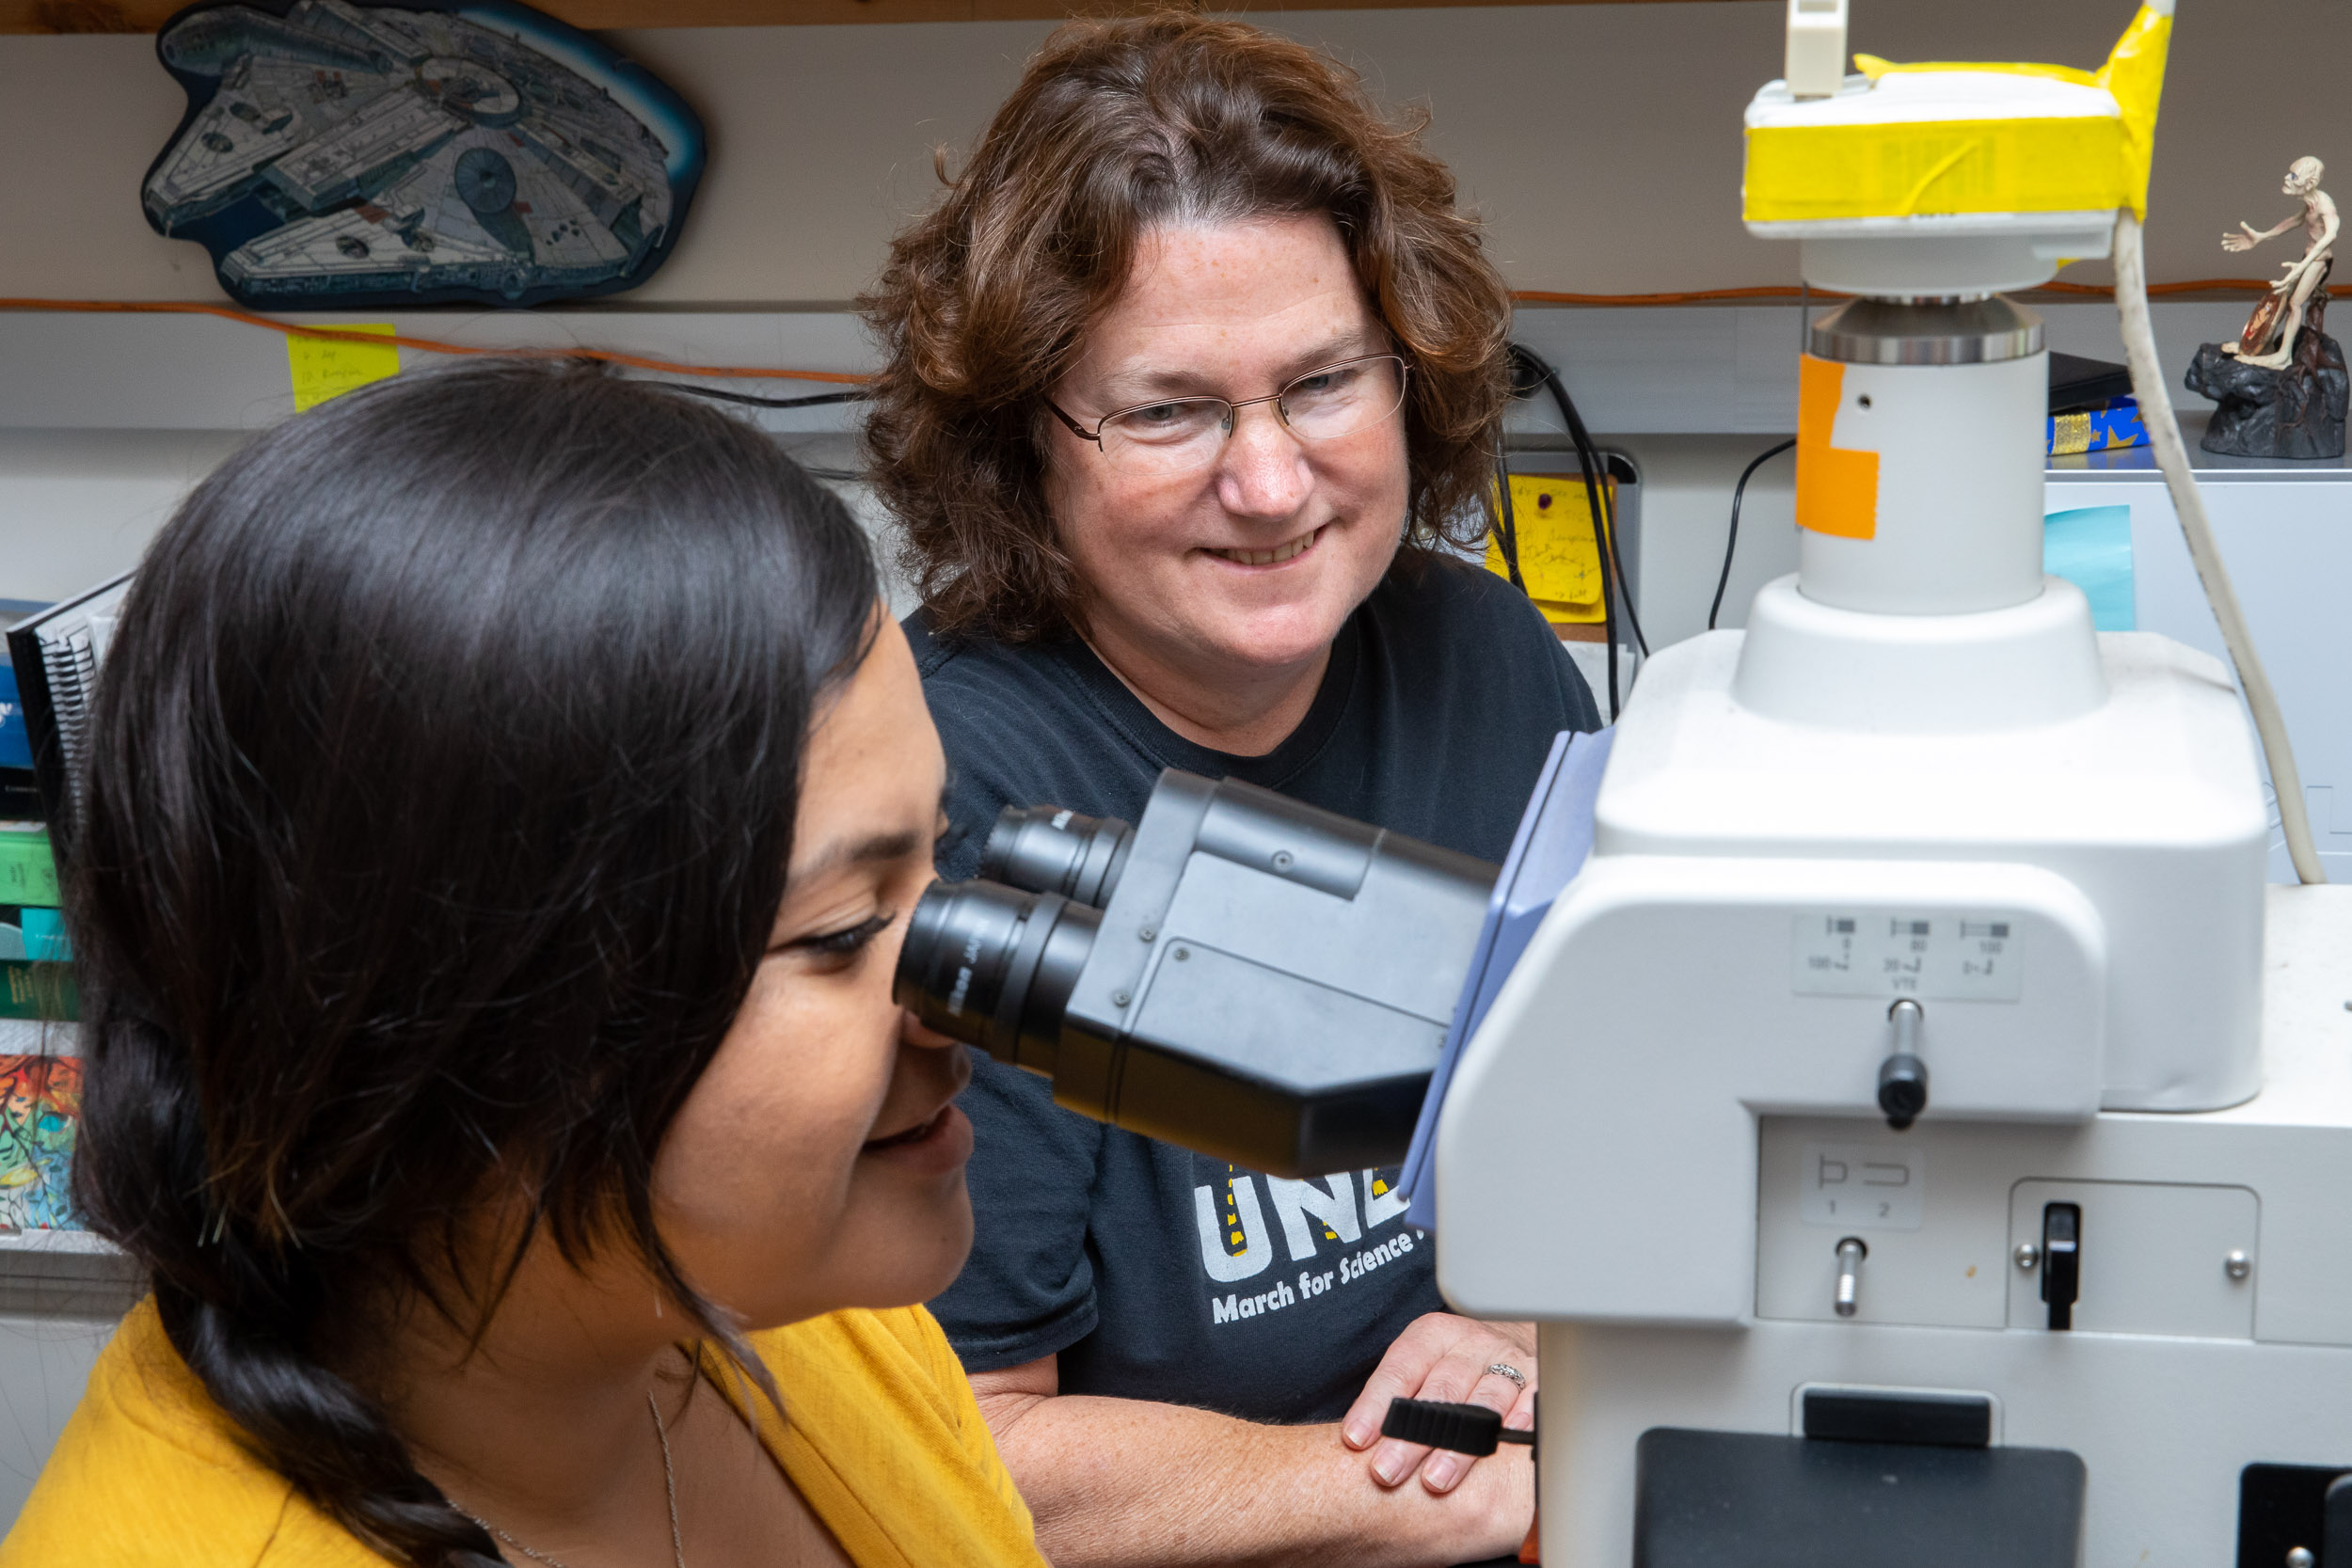 Dr. Dessie Underwood assists student looking into microscope